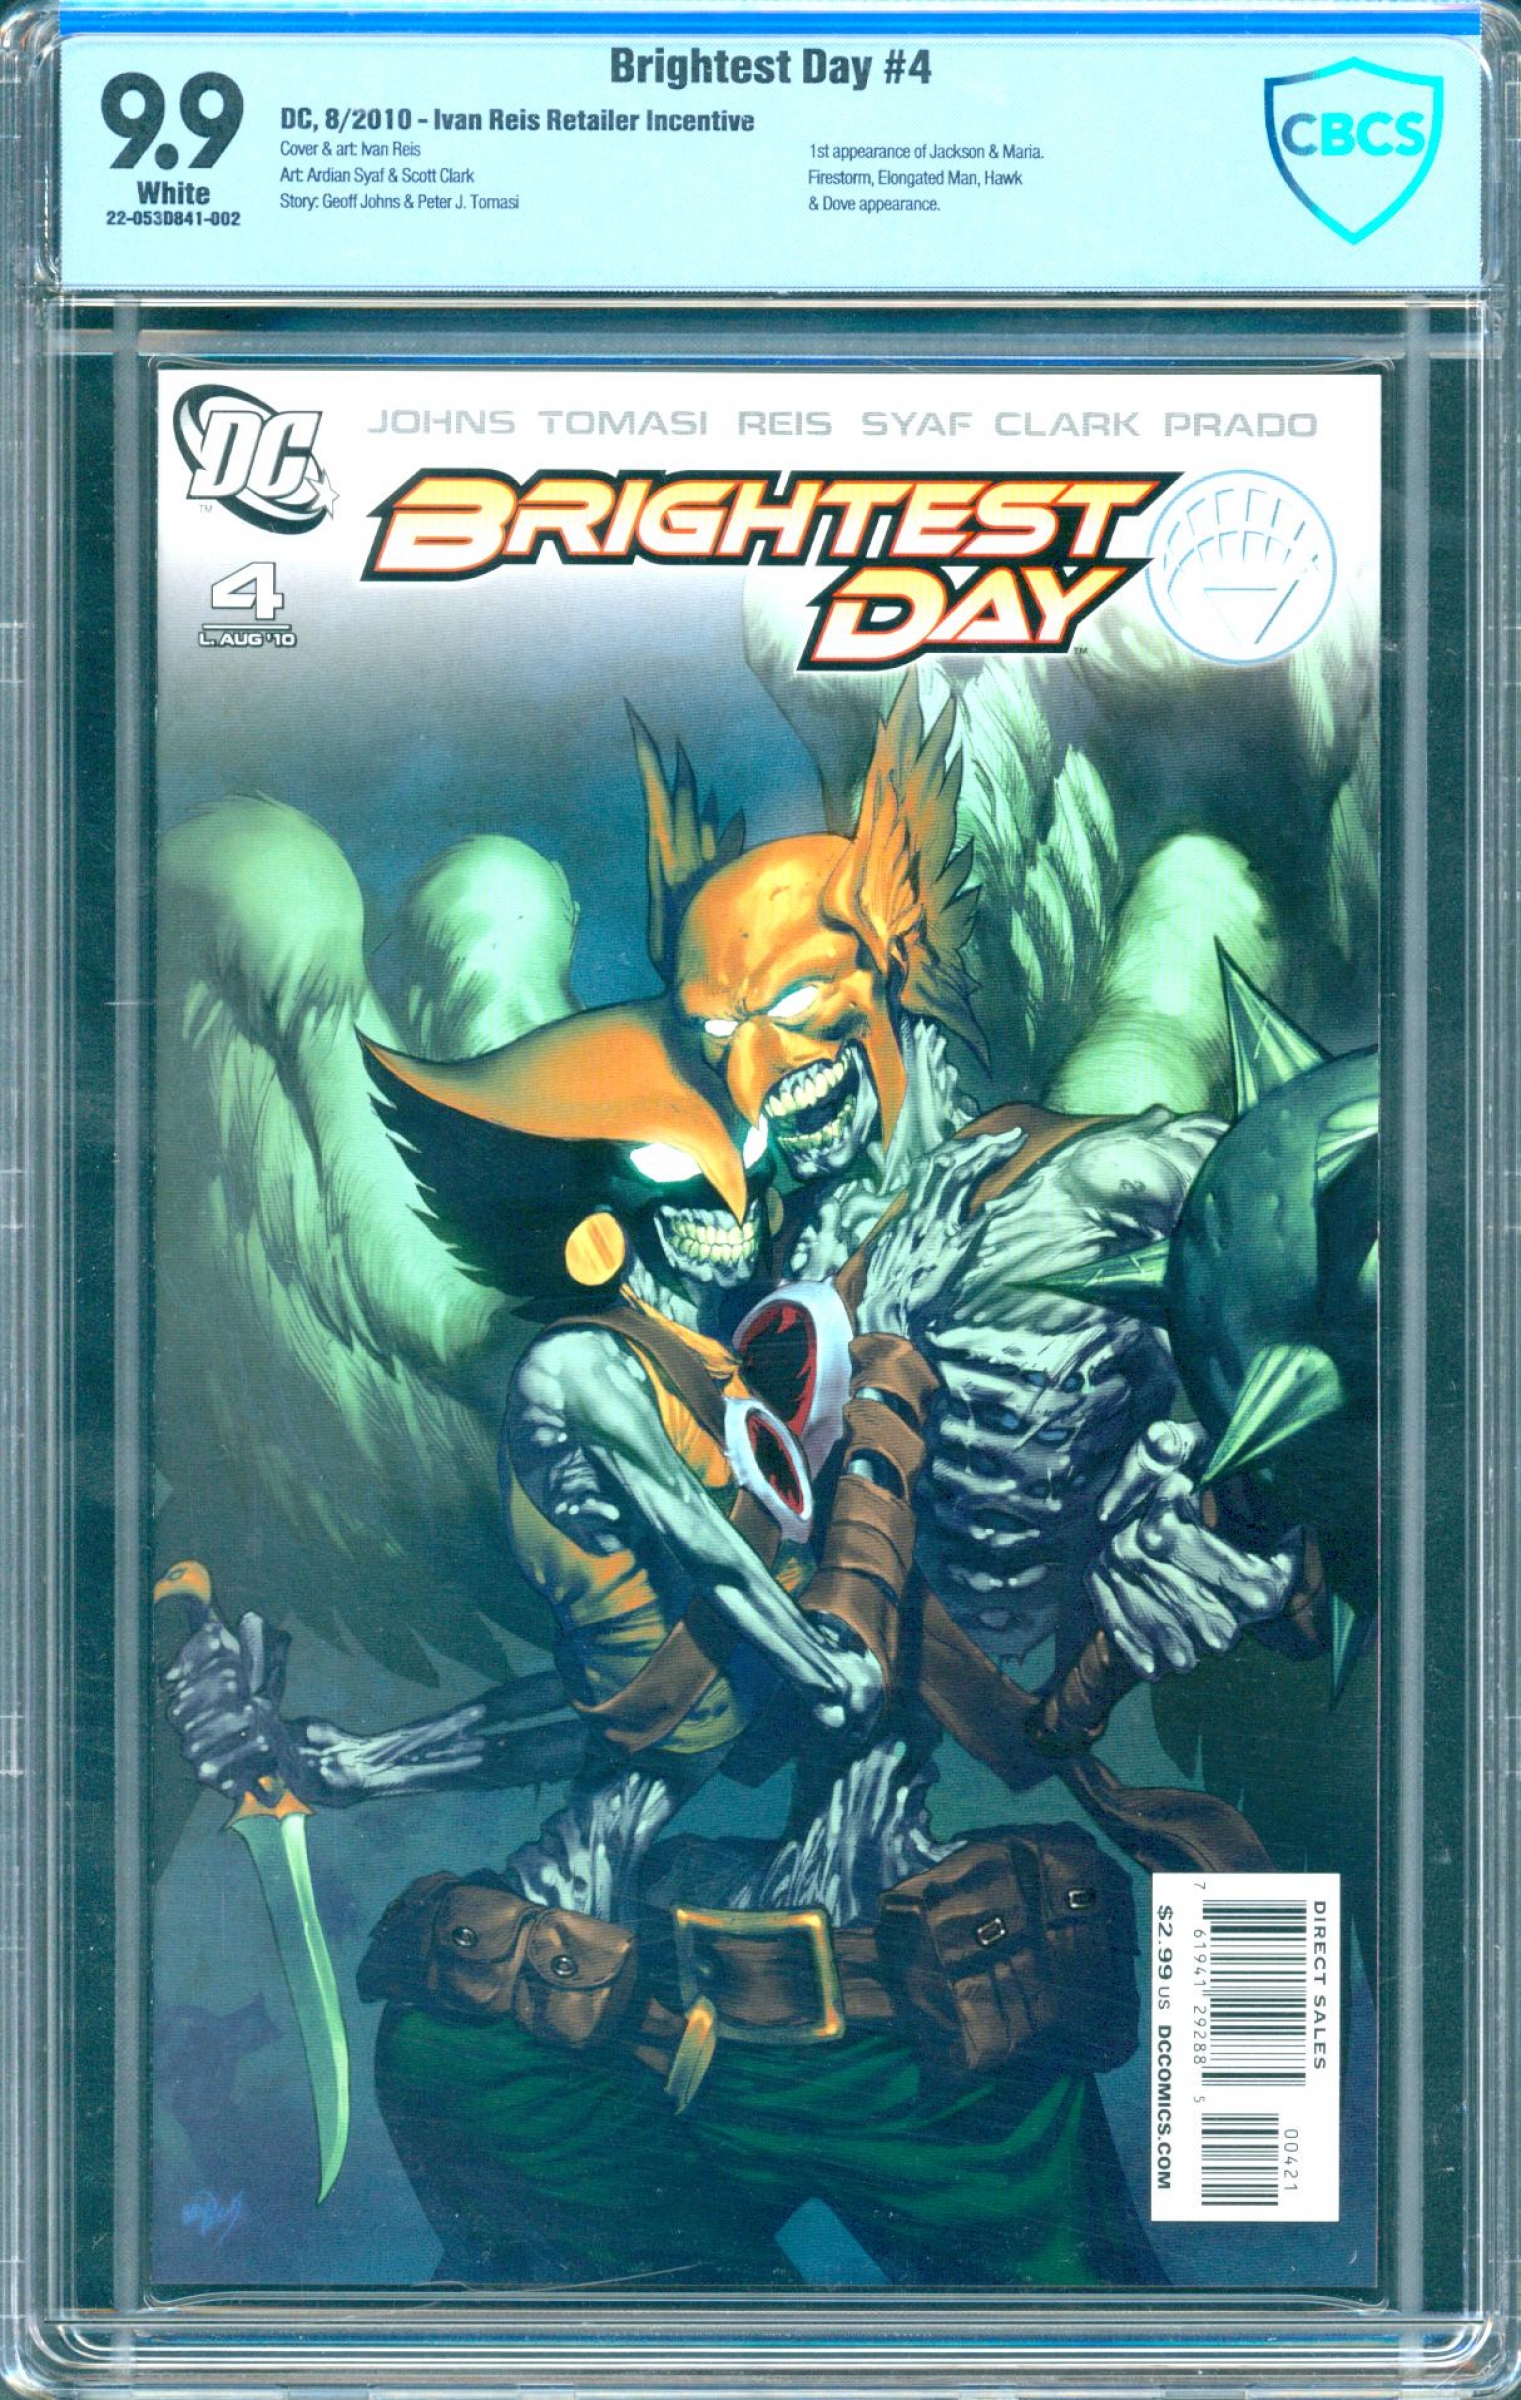 Brightest Day #4 CBCS 9.9 w Retailer Incentive Edition